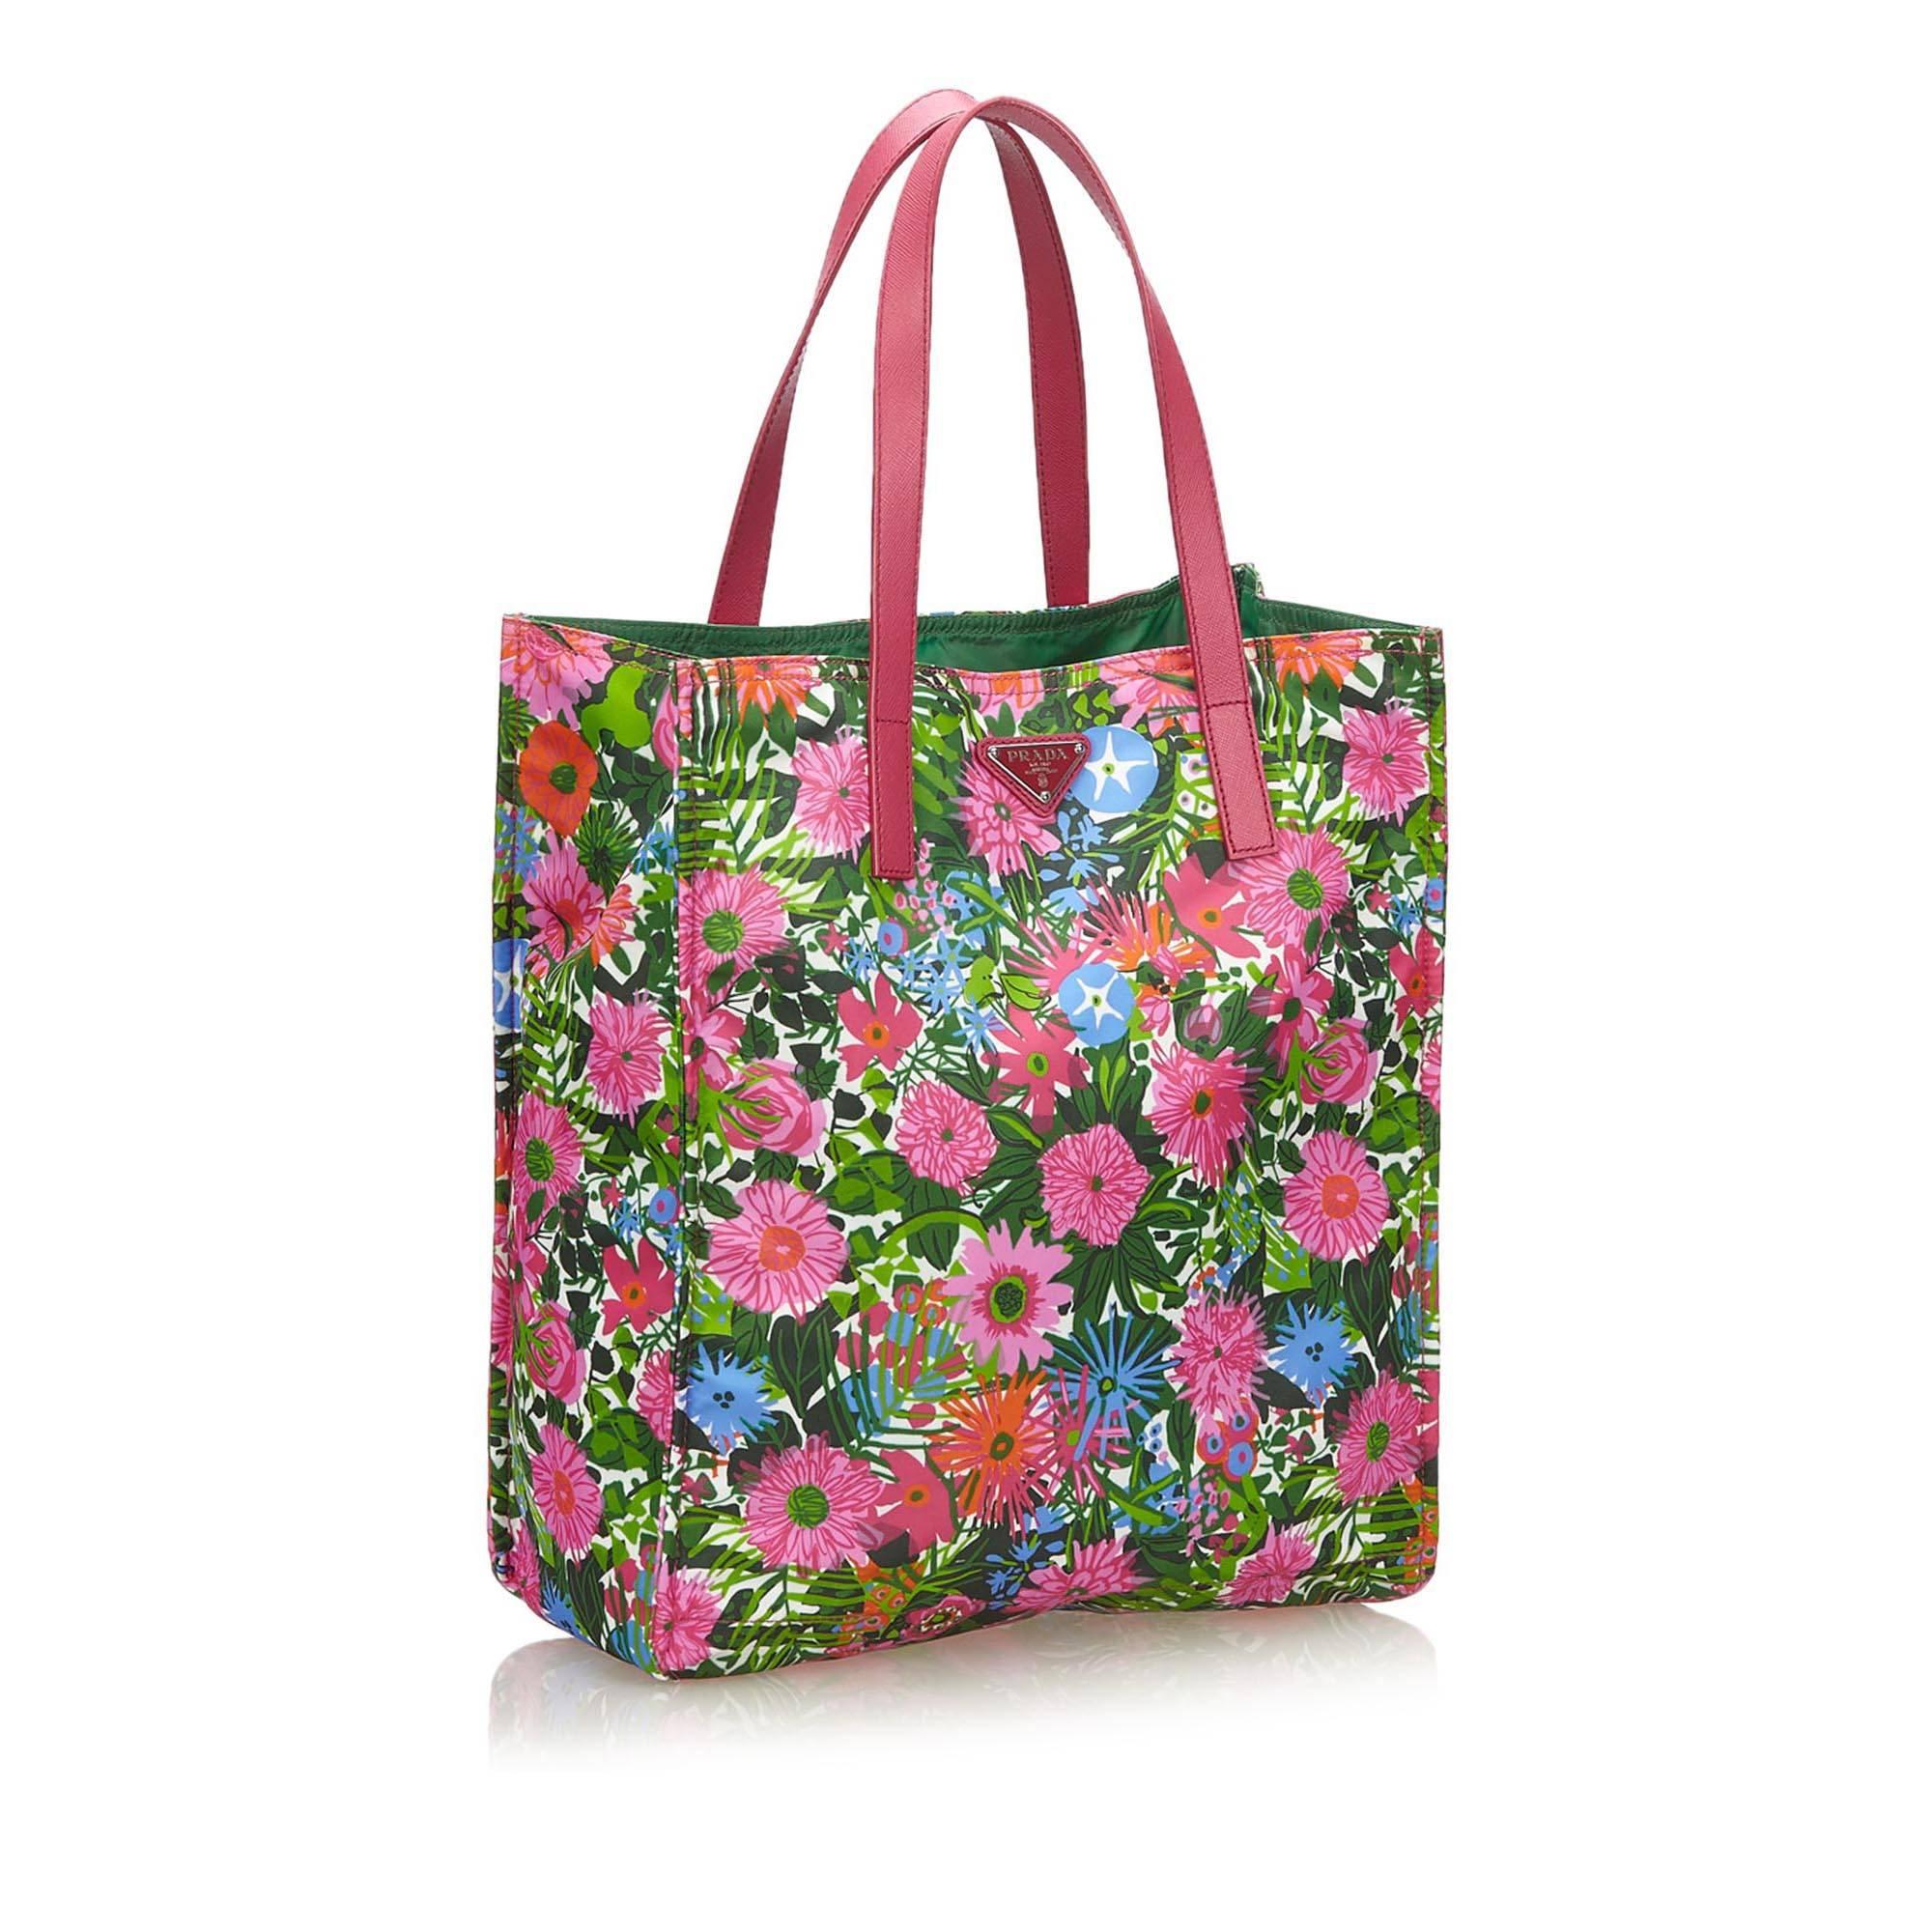 The Tessuto Stampato tote bag features a floral printed nylon body with leather trim, flat leather straps, open top, and interior zip pockets

It carries a A condition rating.

Dimensions: 
Length 30 cm
Width 34 cm
Depth 13 cm
Drop